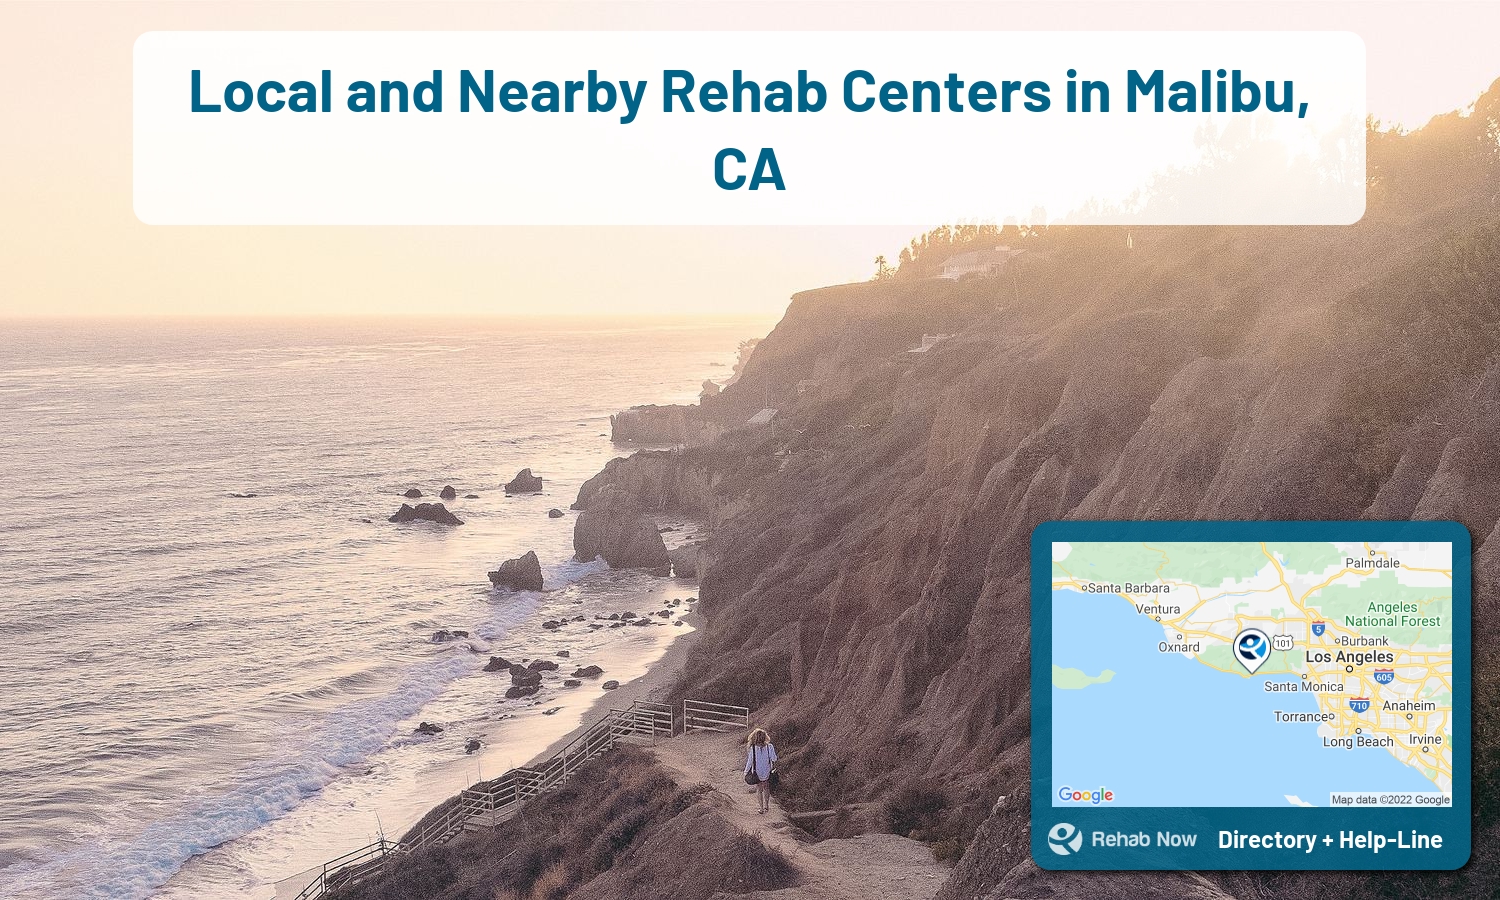 Malibu, CA Treatment Centers. Find drug rehab in Malibu, California, or detox and treatment programs. Get the right help now!